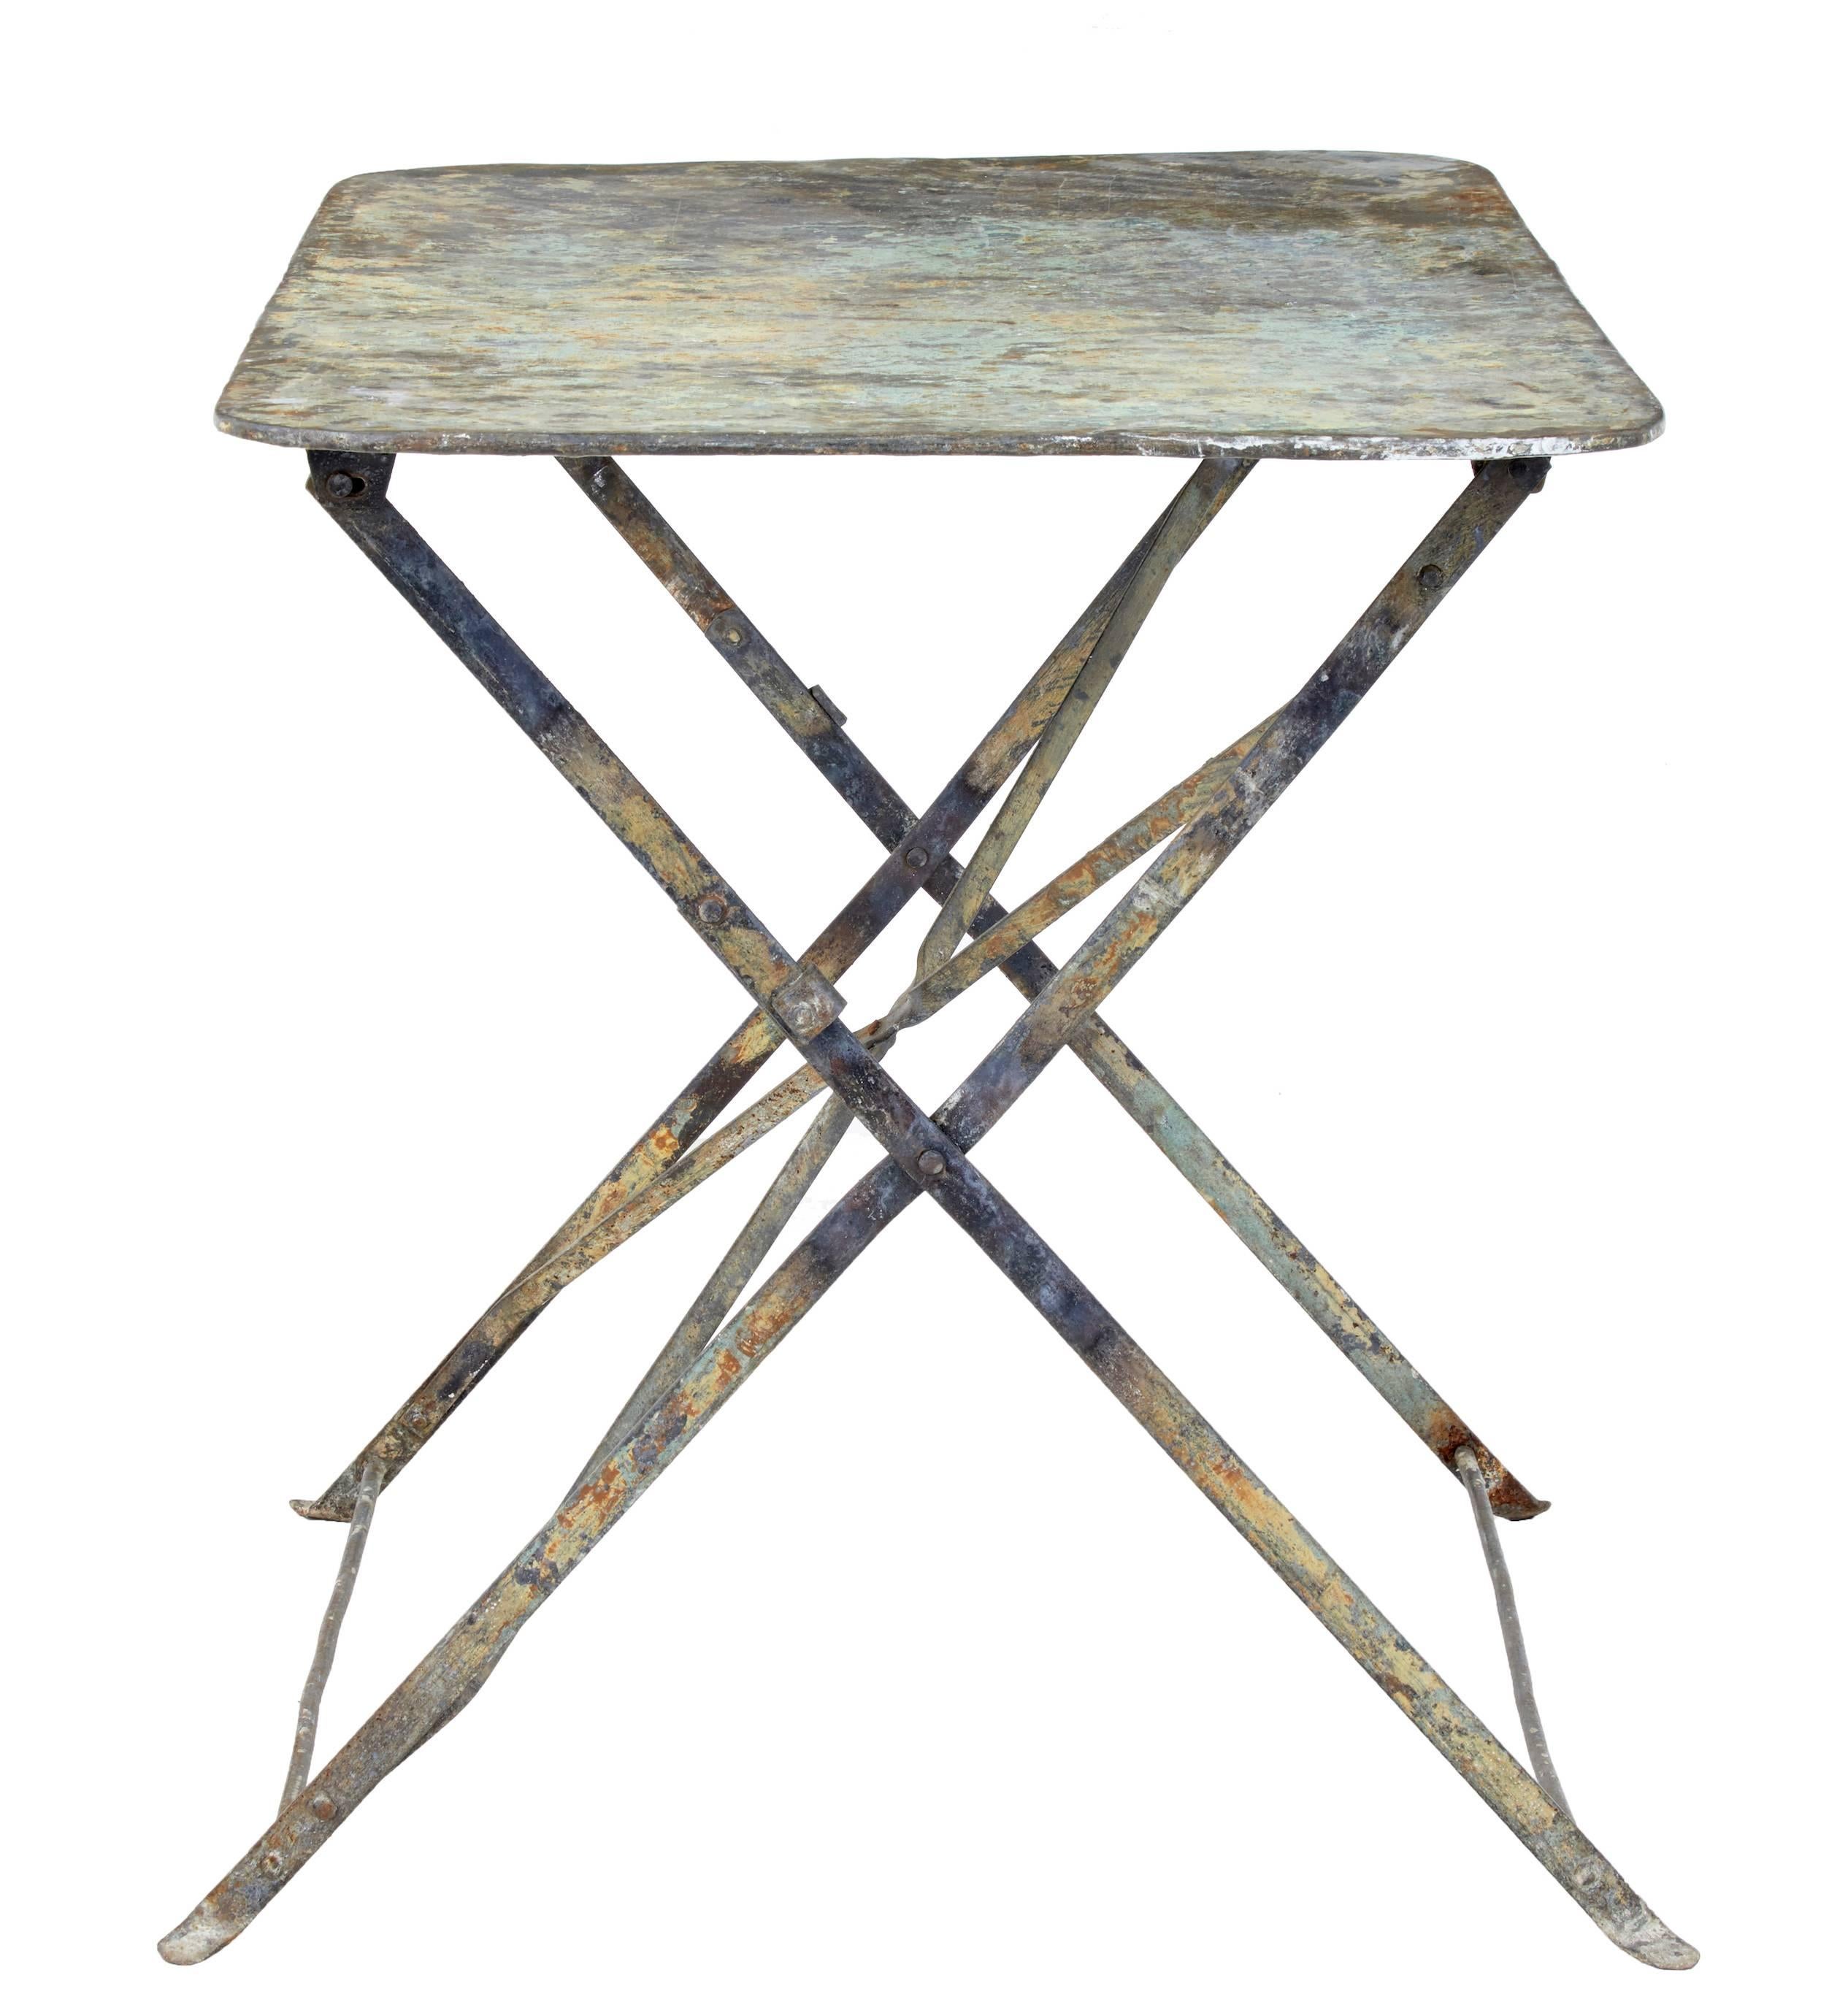 Lovely French country table, circa 1920.

Beautiful colored top which is now showing various layers of previous paint.

Fold up mechanism works smoothly to open out to a sturdy table.

Ideal for use in a garden room or outside.